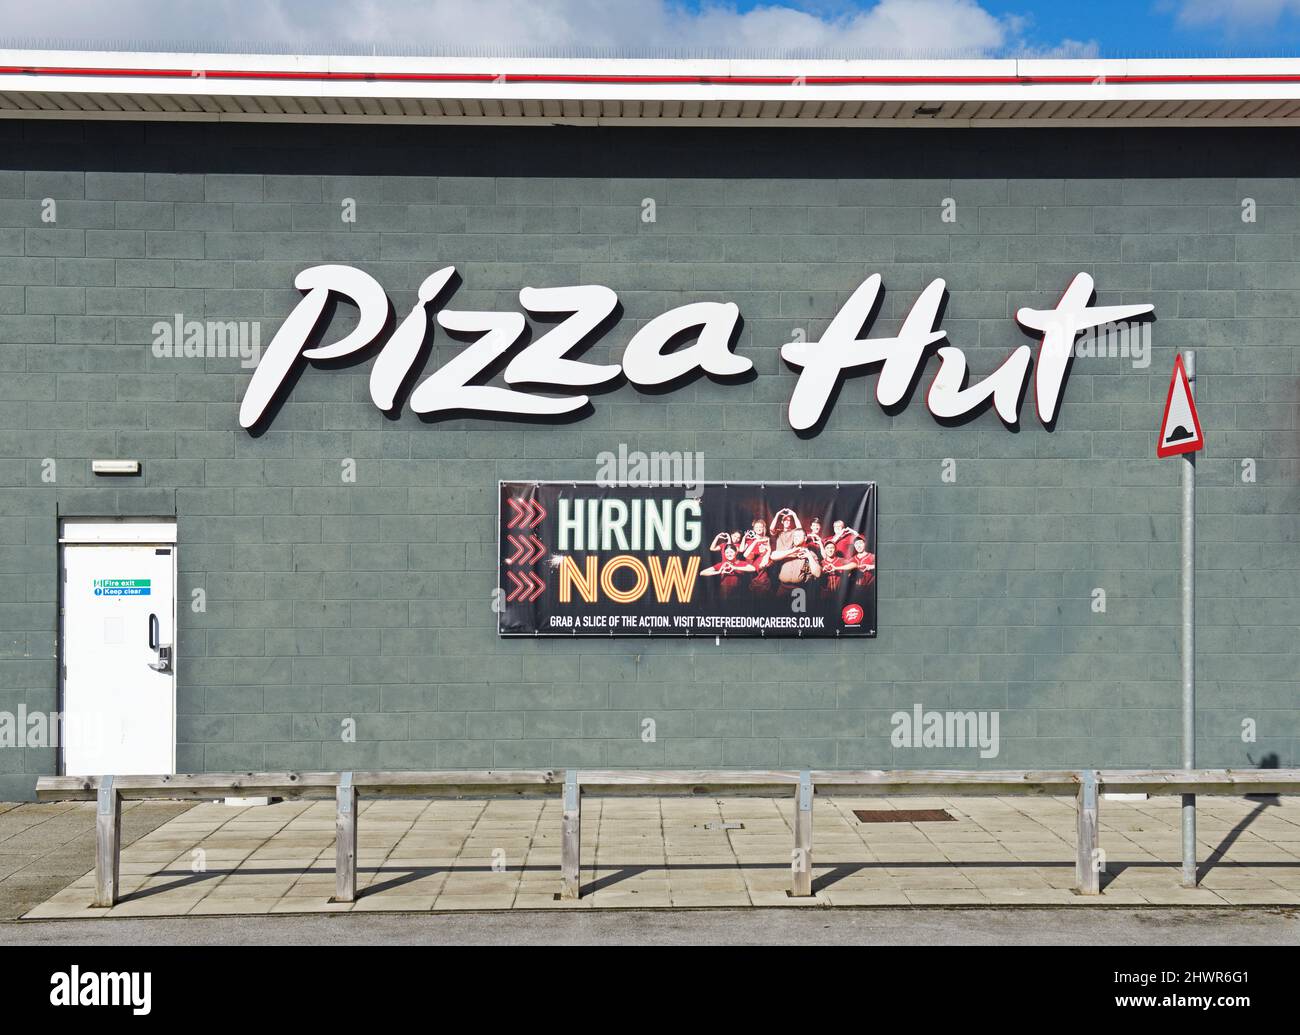 Sign - hiring now - to work at Pizza Hut restaurant, England UK Stock Photo